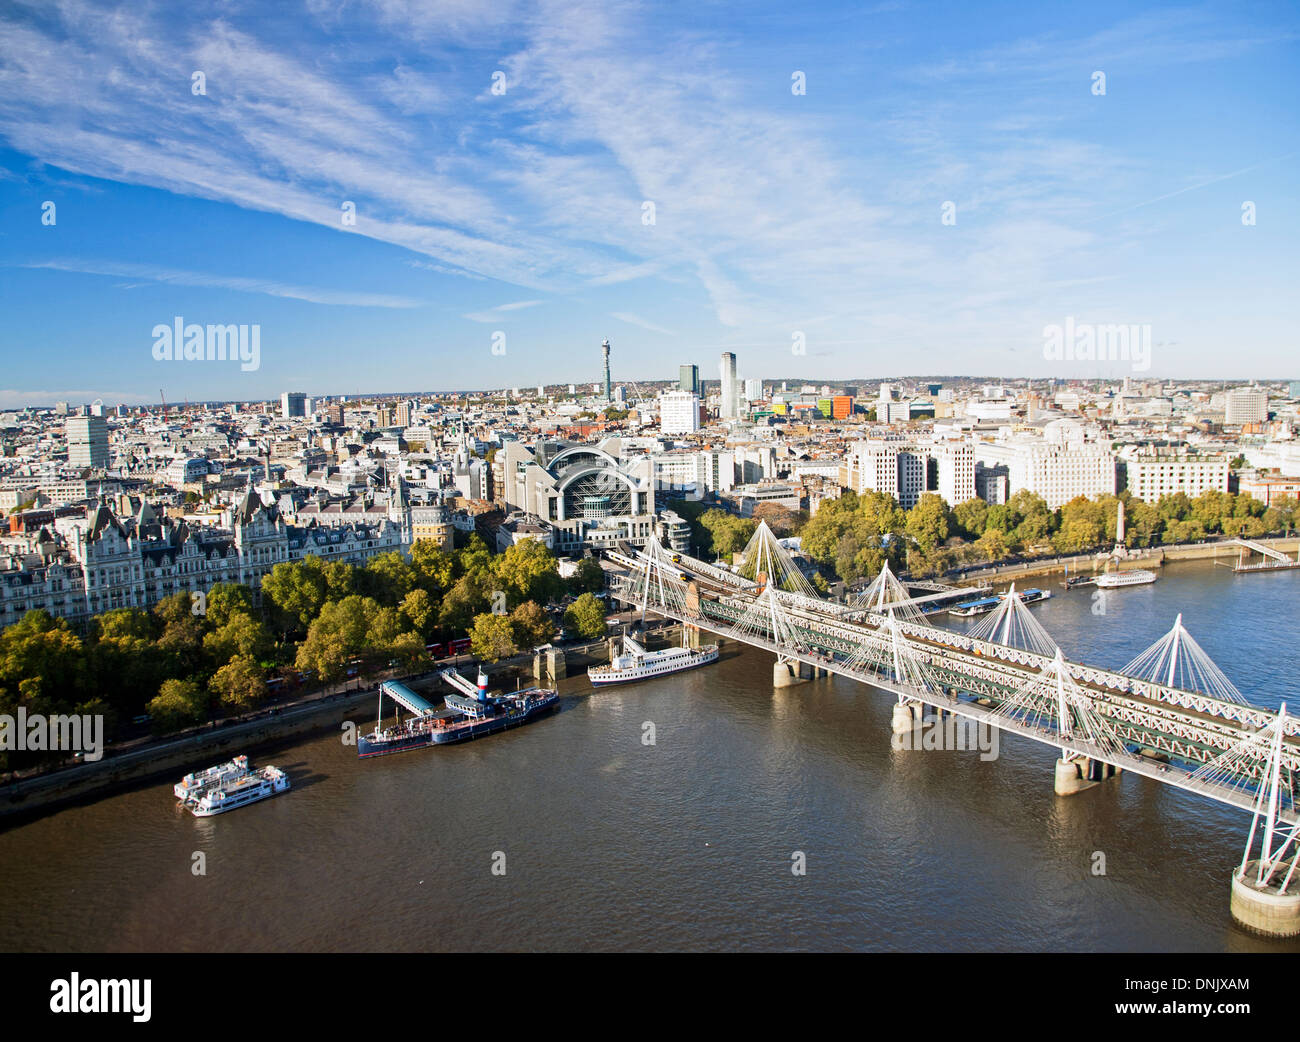 Birdseye view of Hungerford Bridge, one of the Golden Jubilee Bridges on the South Bank, River Thames, London, UK. Stock Photo